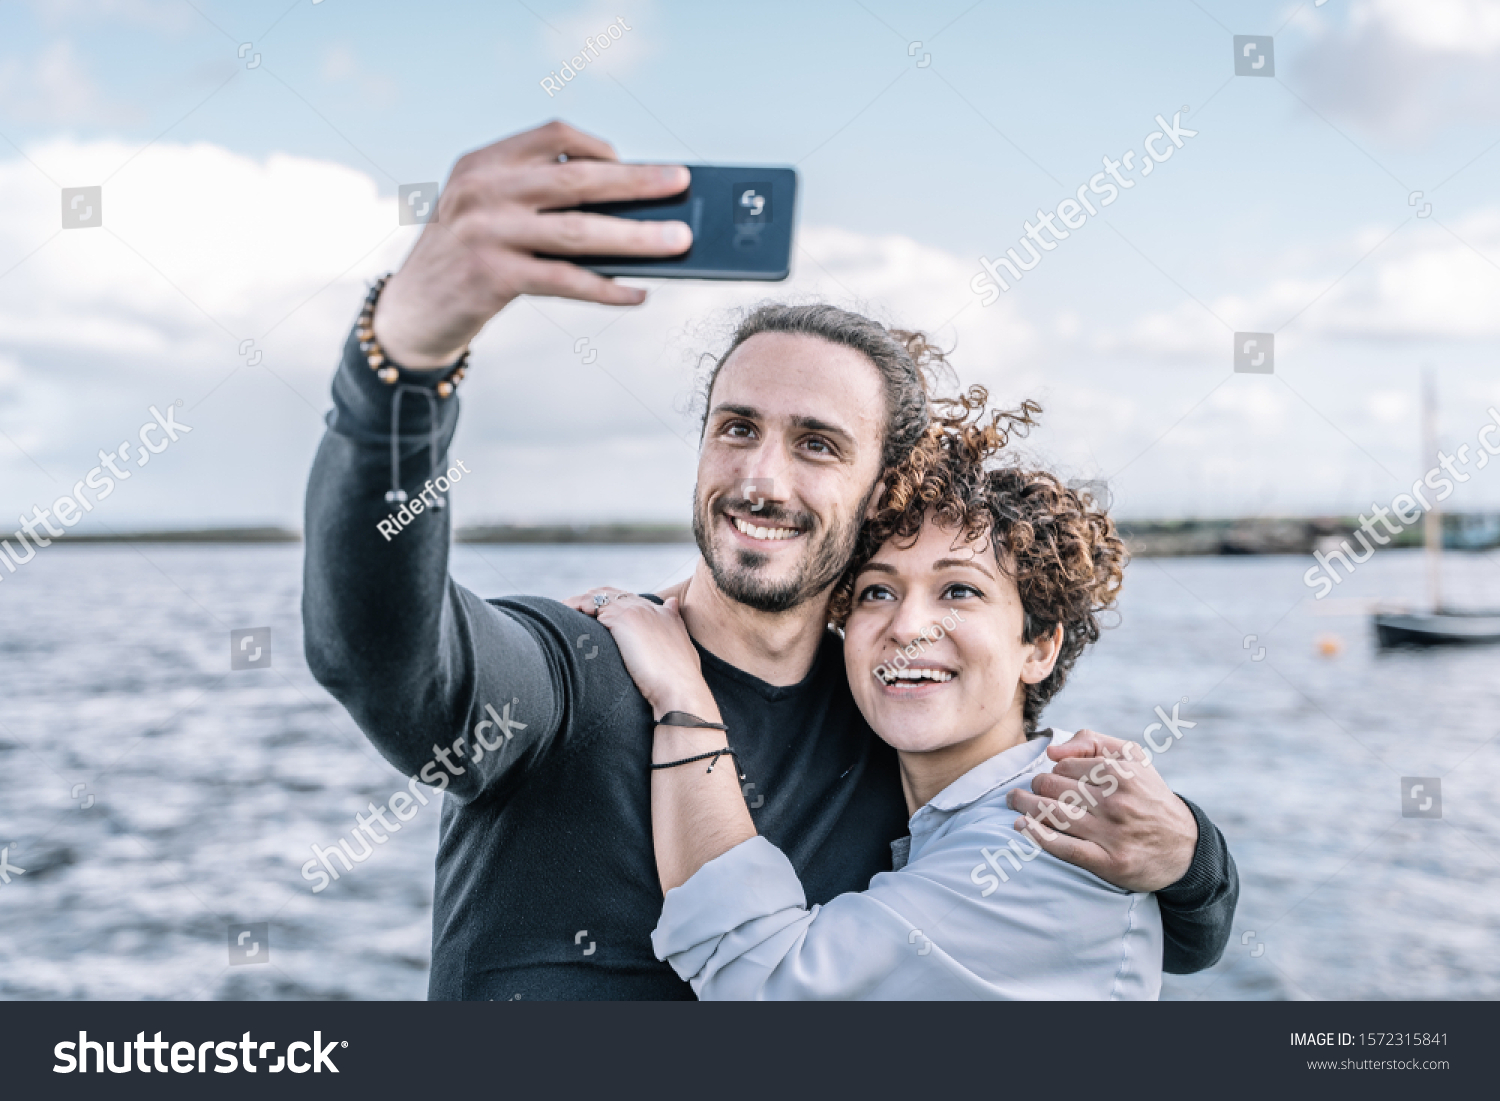 Stock photo of a young couple embraced by the shoulder making a selfie with the port and the sea out of focus background #1572315841